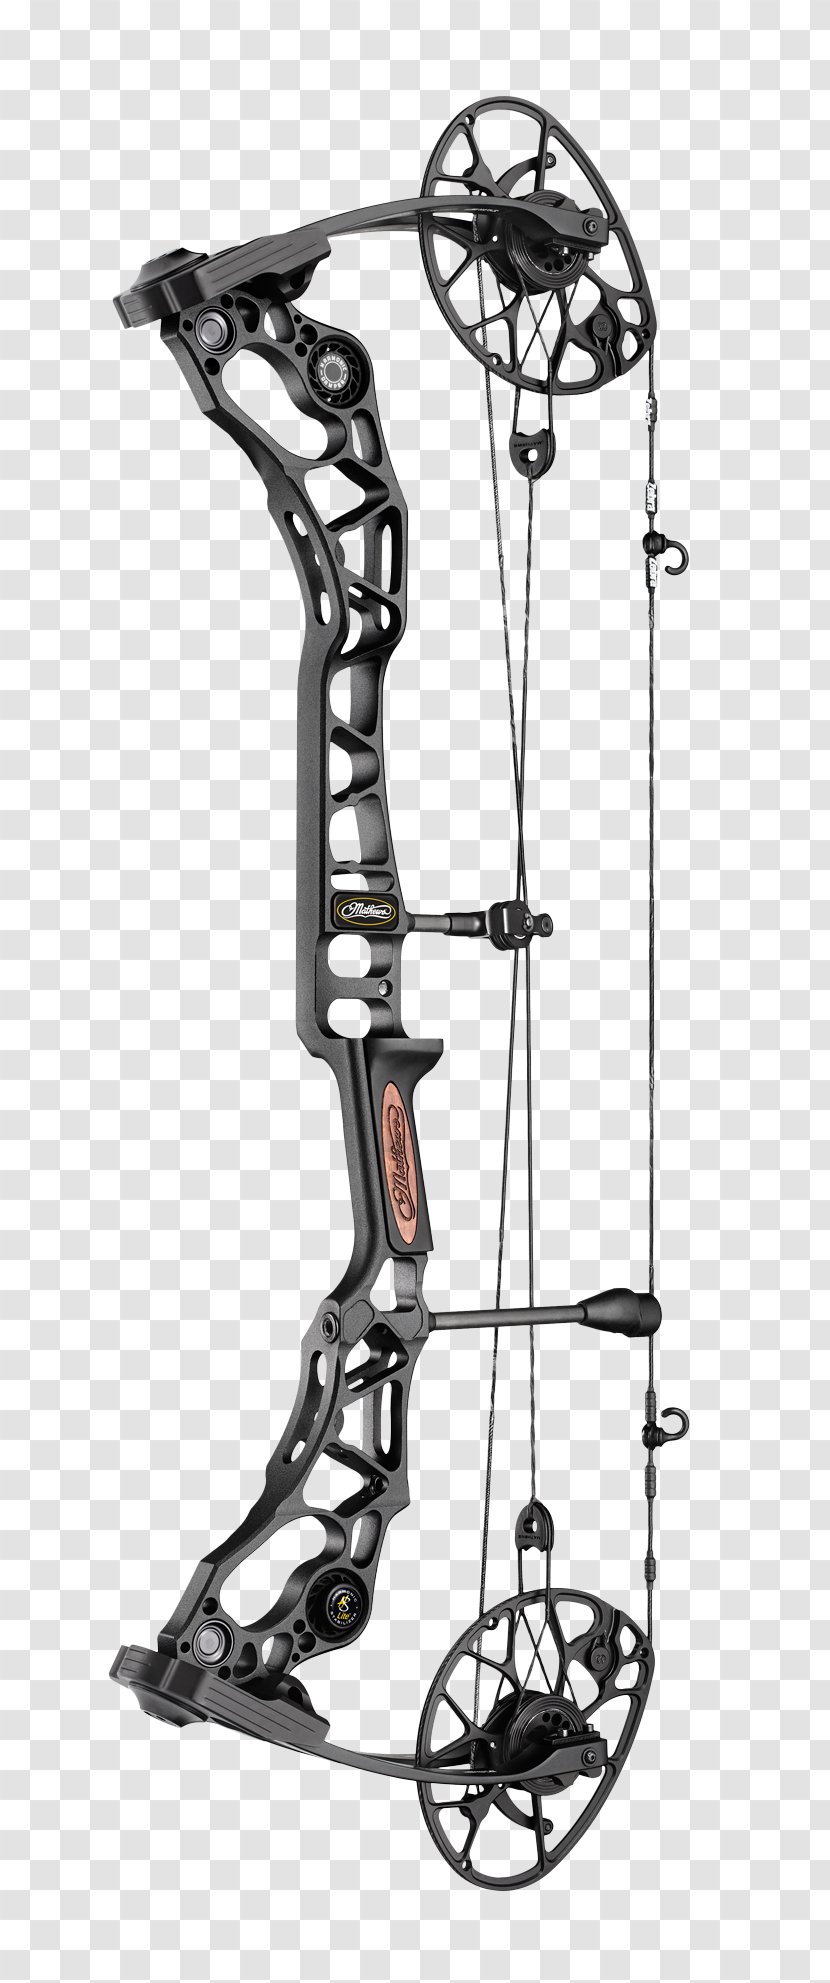 Compound Bows Bow And Arrow Mathews Archery, Inc. Hunting - A Deer Stumbled By Stone Transparent PNG